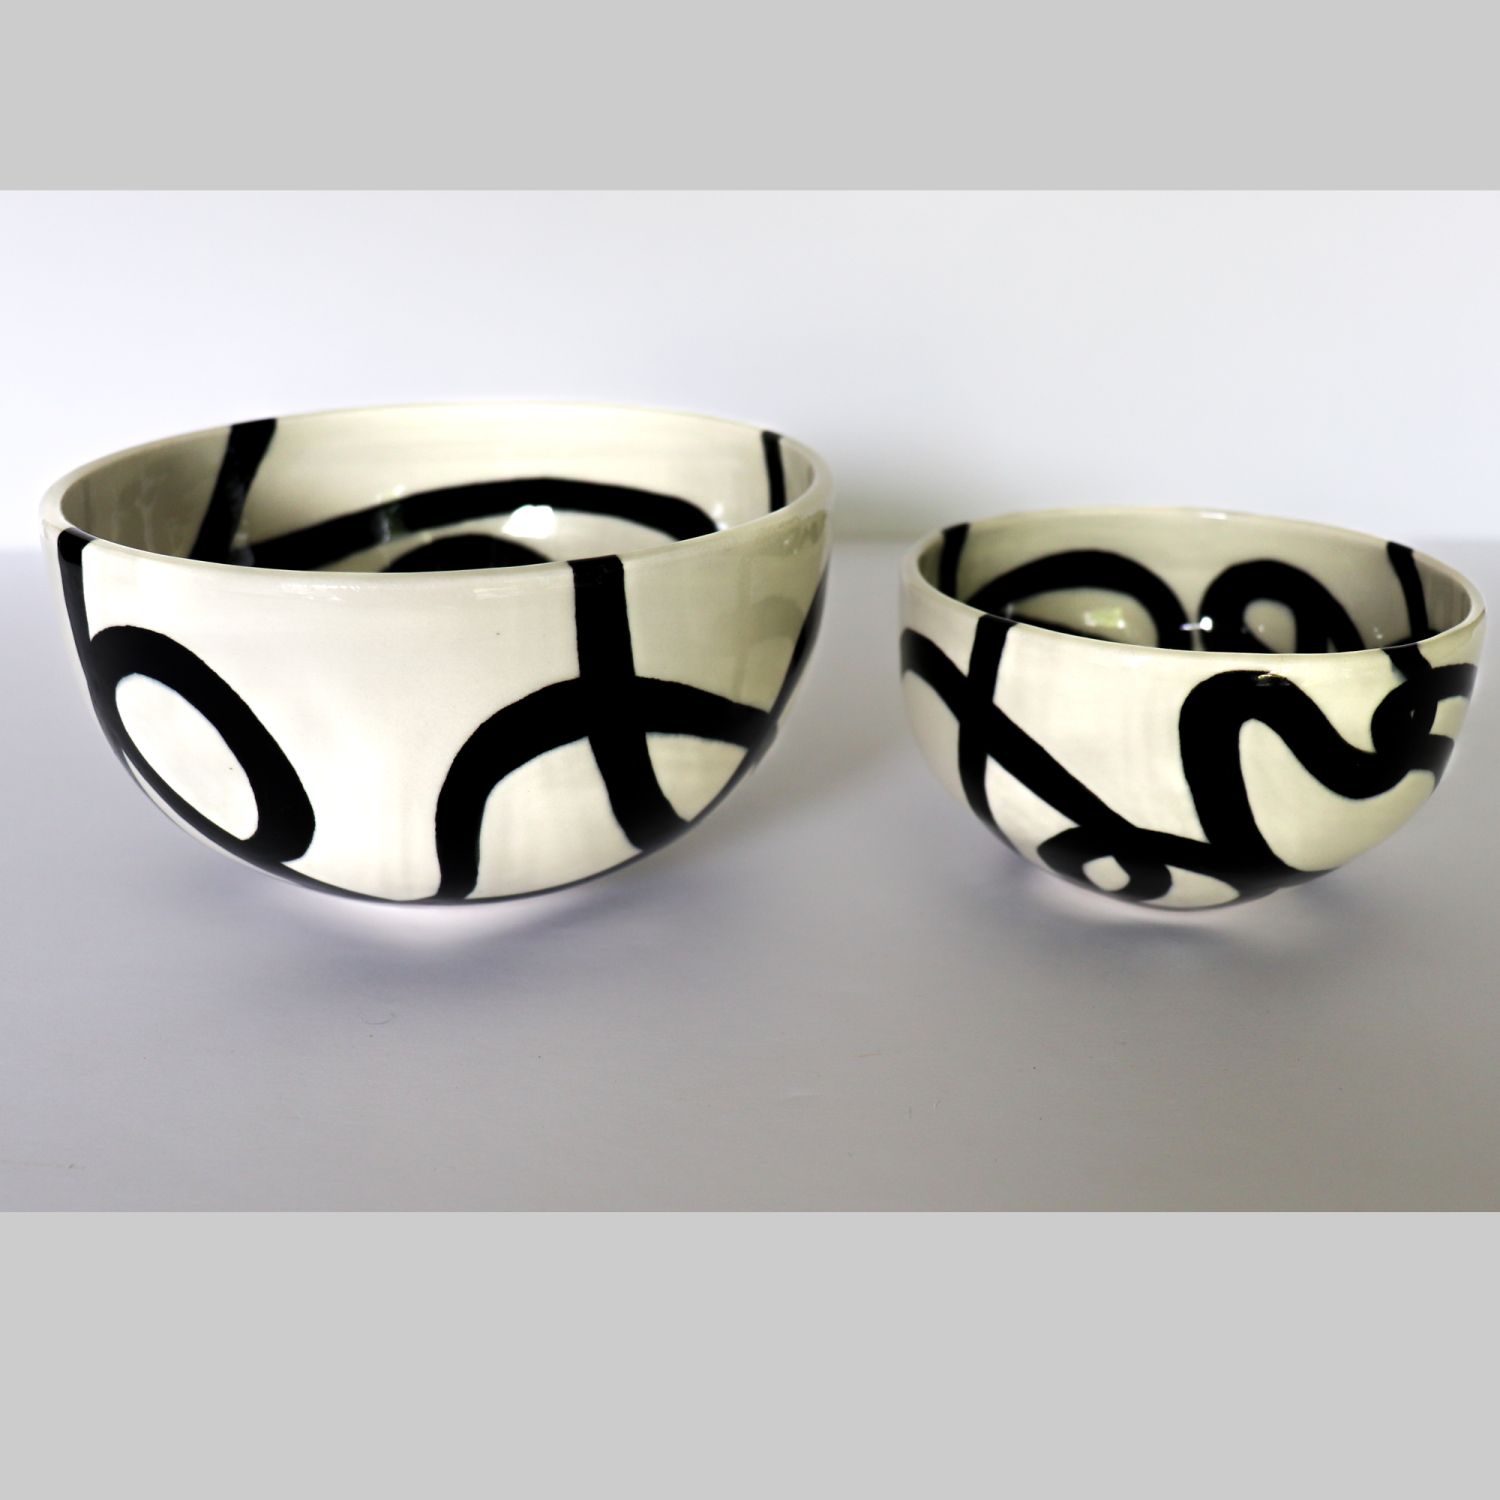 Alana Marcoccia: Interconnected Nesting Bowl – Small Product Image 5 of 9